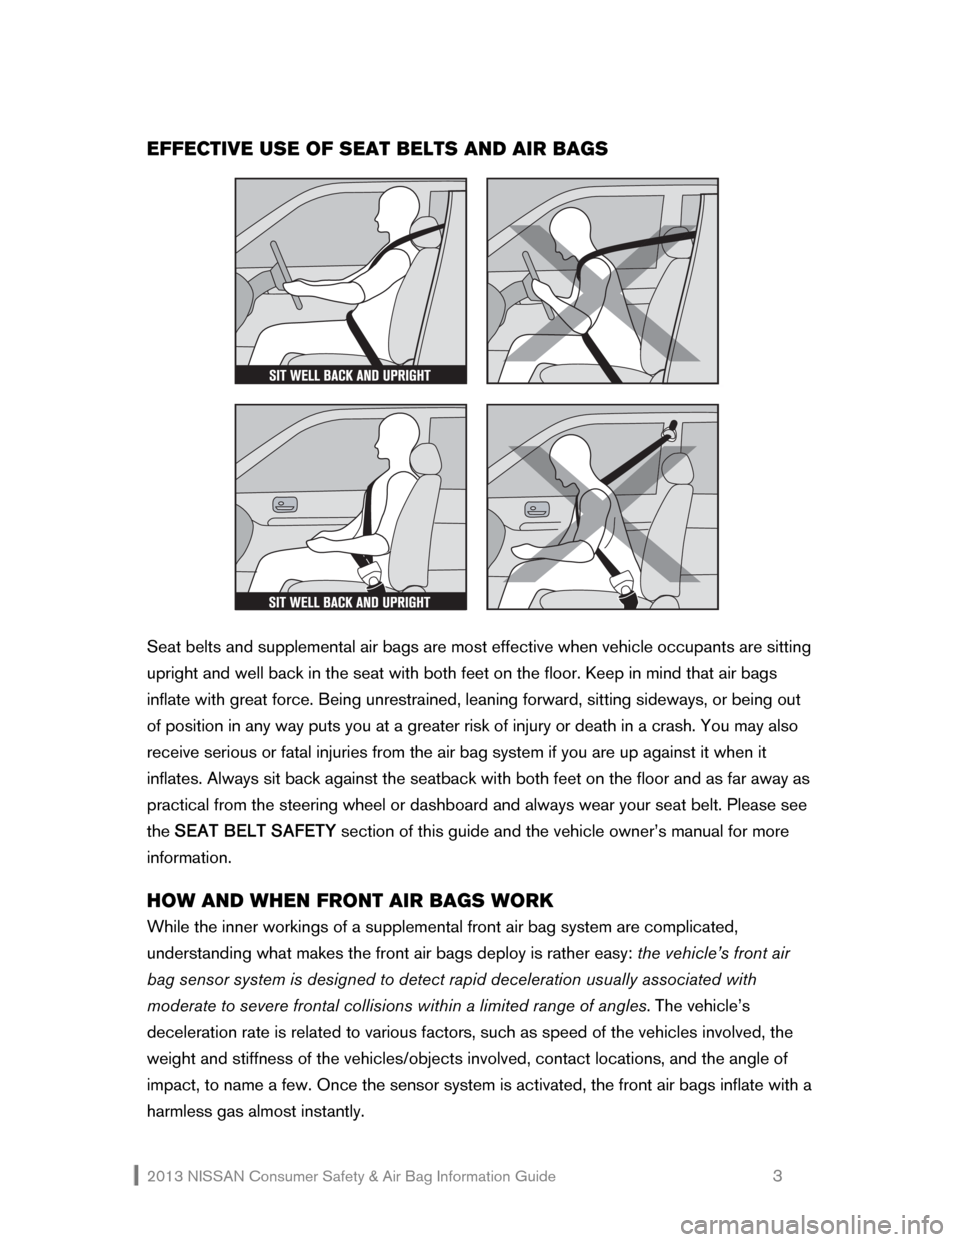 NISSAN CUBE 2013 3.G Consumer Safety Air Bag Information Guide 2013 NISSAN Consumer Safety & Air Bag Information Guide                                                   3 
EFFECTIVE USE OF SEAT BELTS AND AIR BAGS 
 
 
 
Seat belts and supplemental air bags are mo